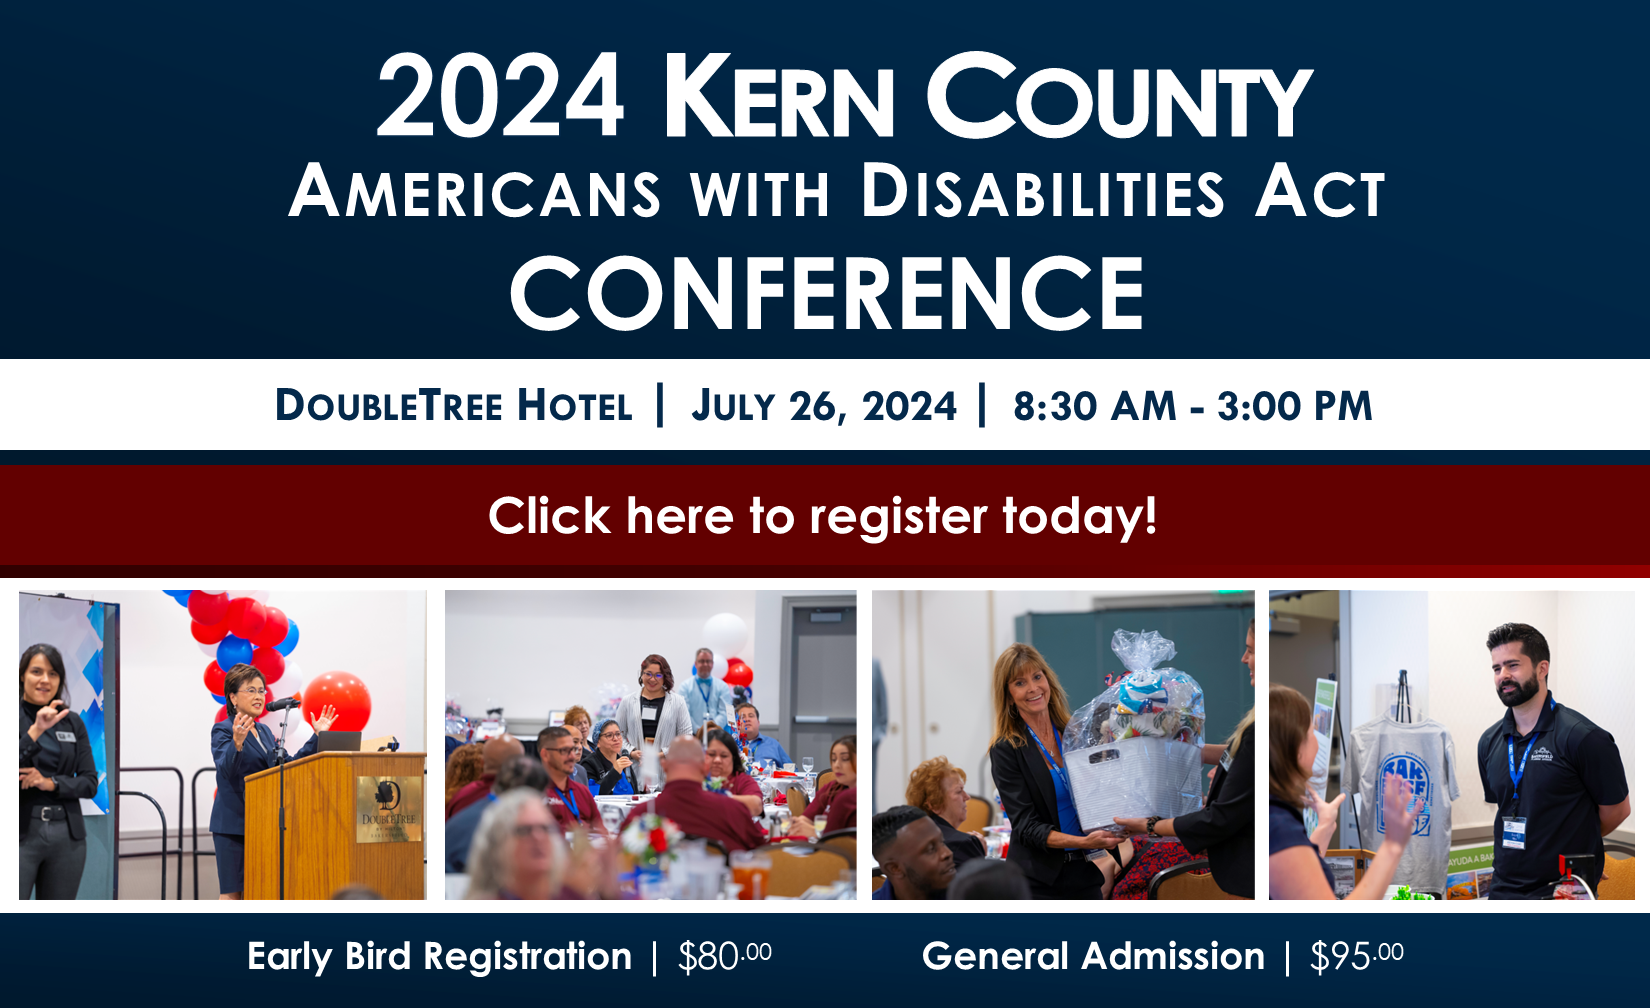 2024 Kern County American with Disabilities Act Conference | DoubleTree Hotel | July 26, 2024 | 8:30 AM - 3:00 PM | Click here to register today! | Early Bird Registration $80.00 | General Admission $95.00